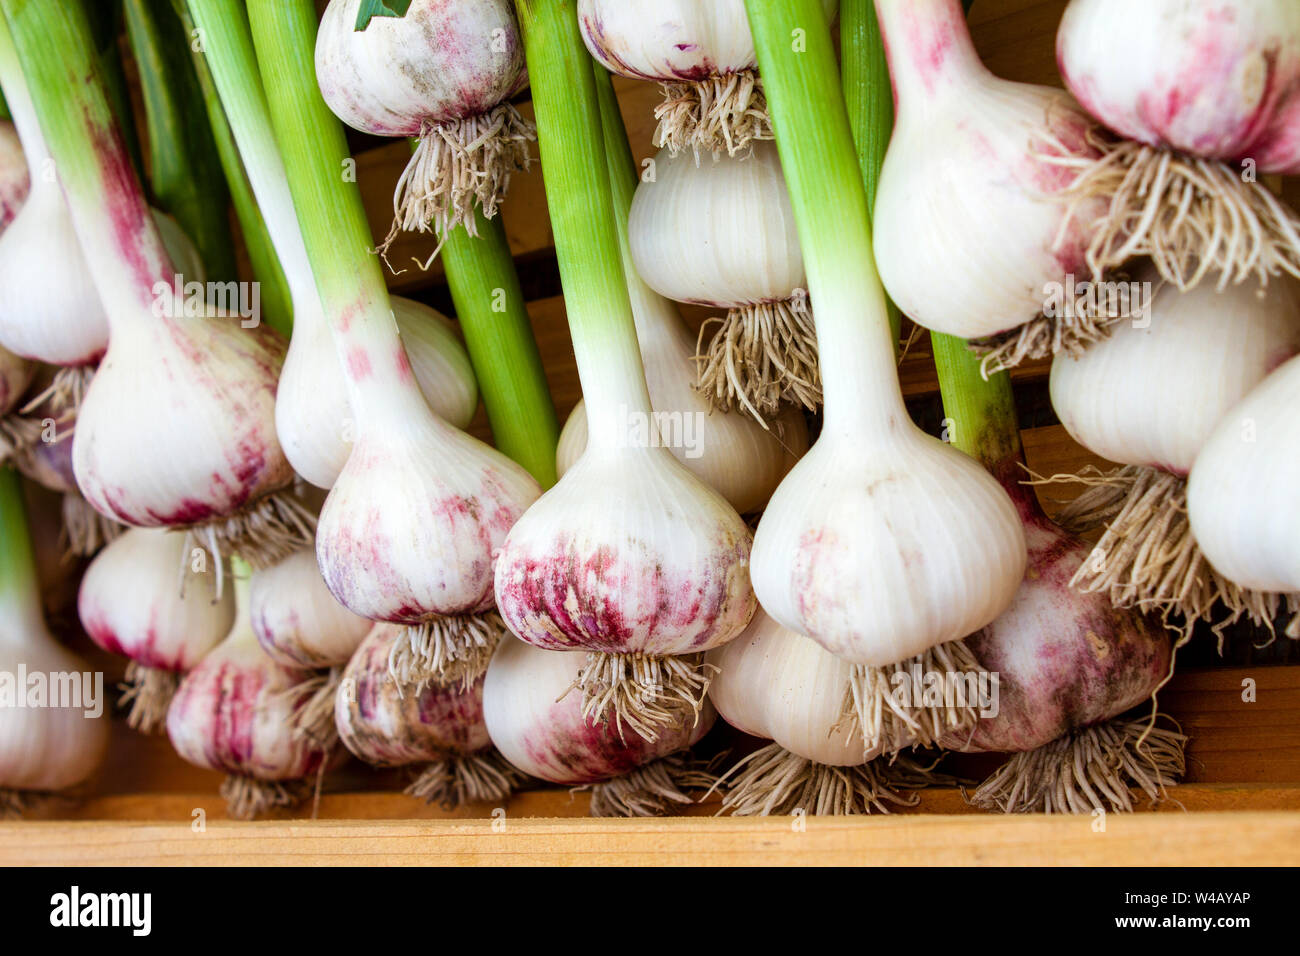 Display of fresh ripe organic red russian garlic bulb at the weekend farmer's market in the Okanagan Valley city of Penticton, British Columbia, Canad Stock Photo